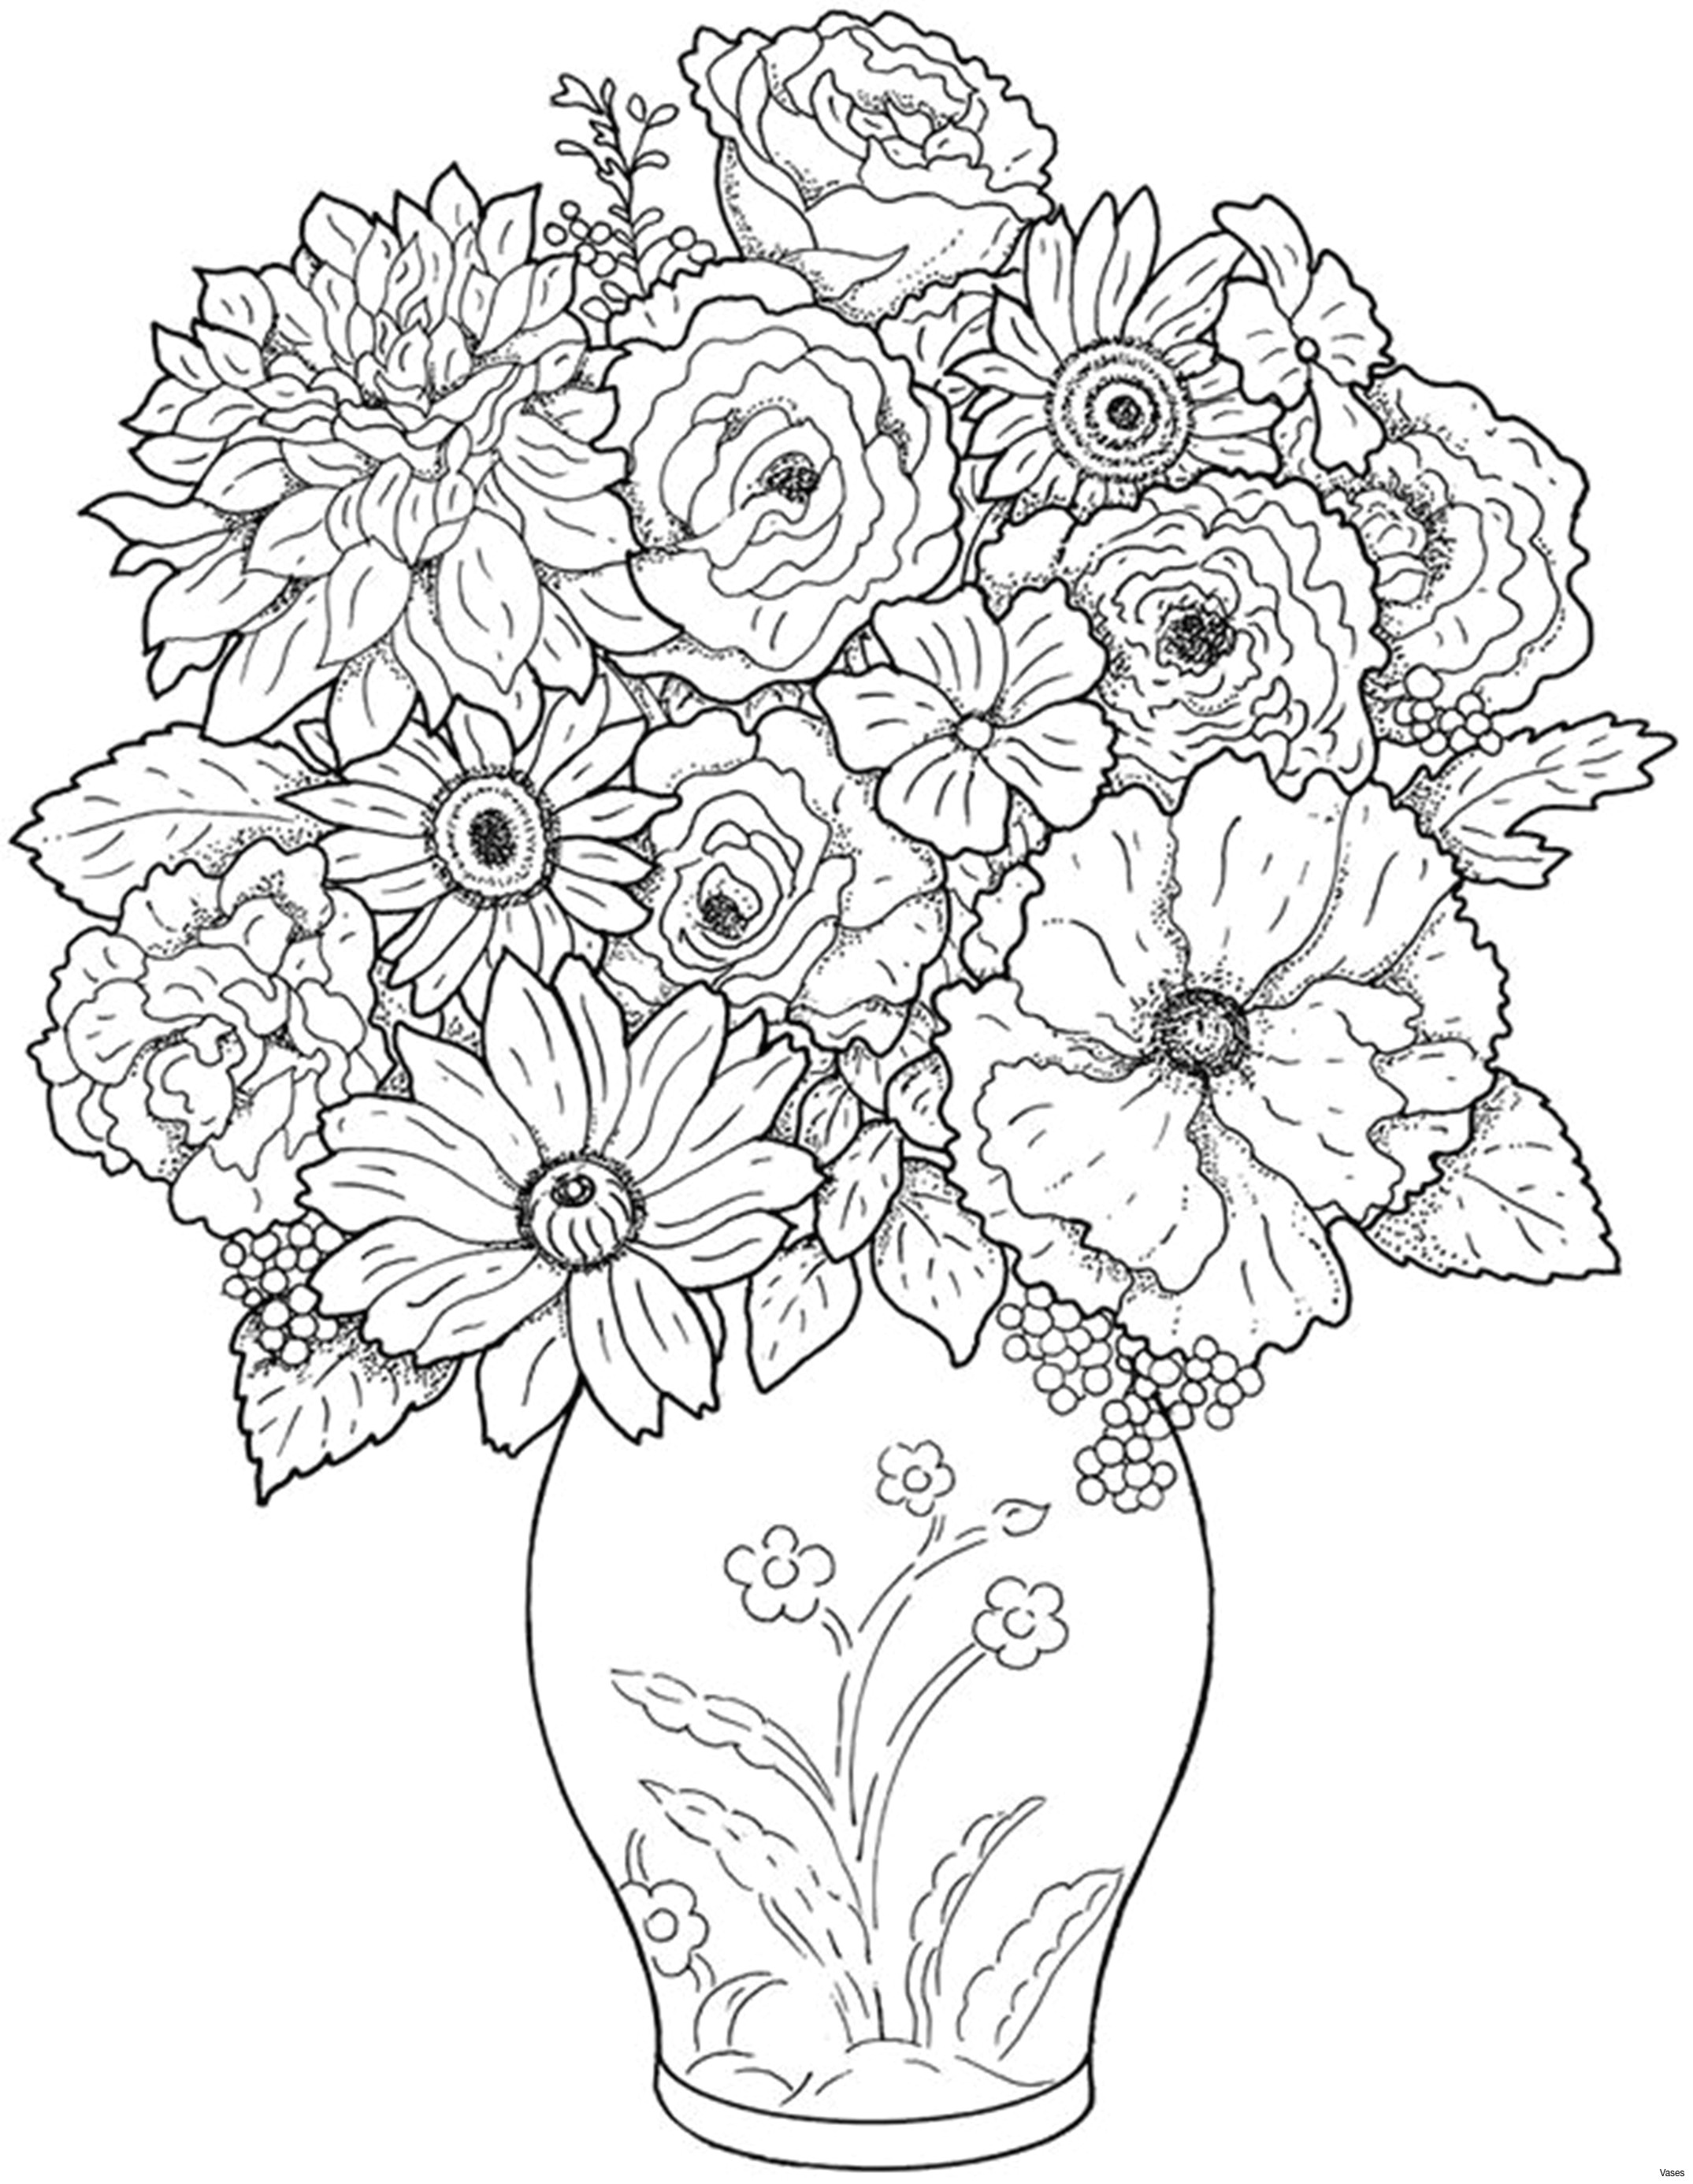 Drawing Flowers with Name Www Colouring Pages Aua Ergewohnliche Cool Vases Flower Vase Coloring